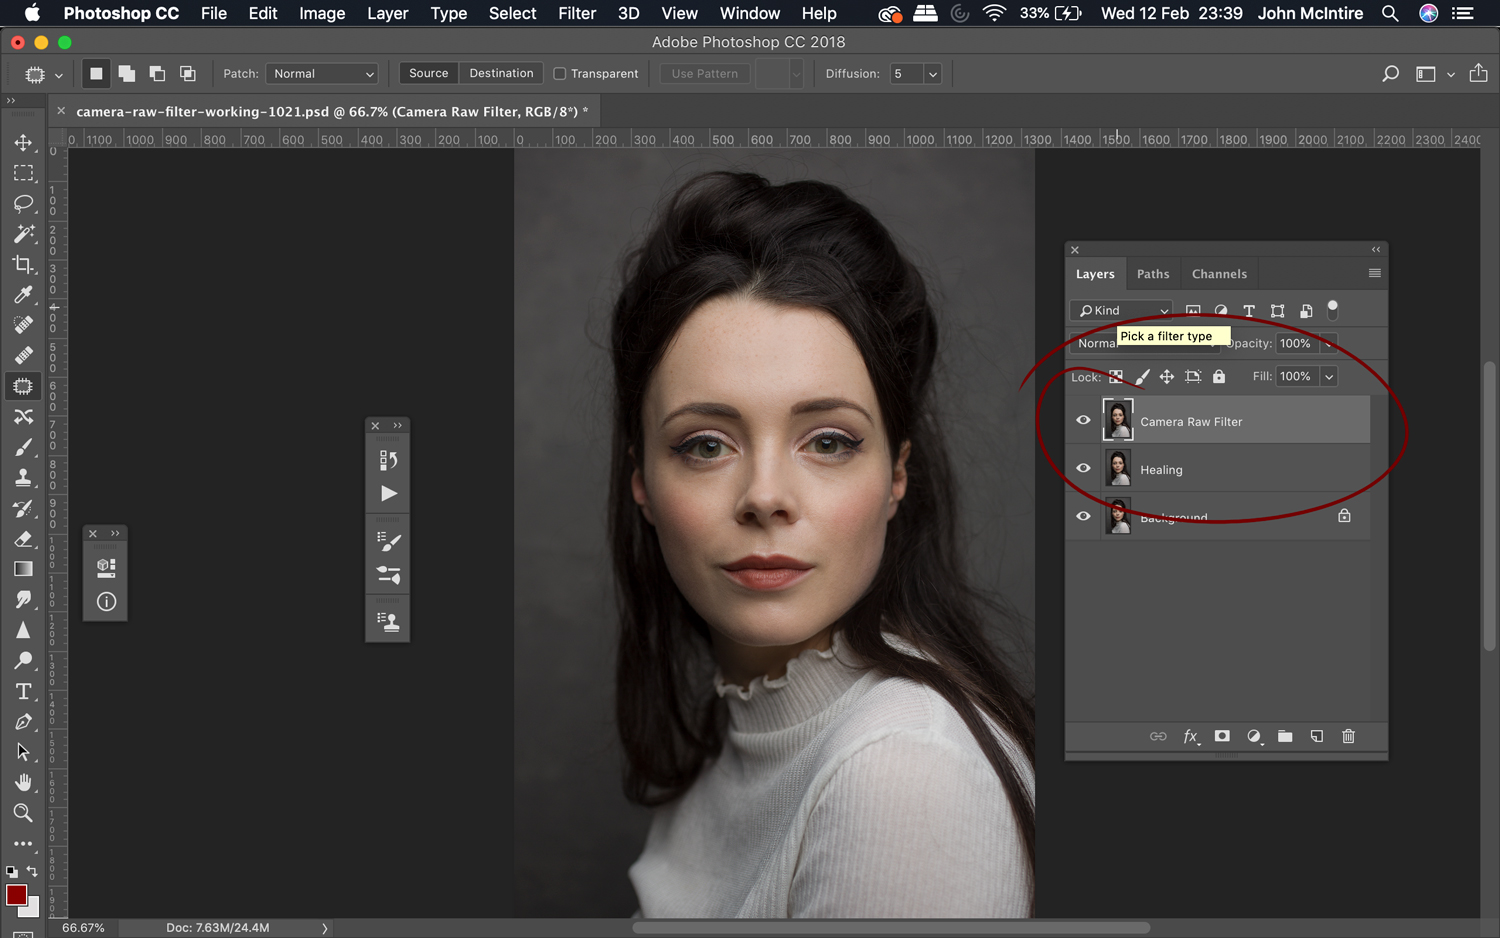 How to use the Photoshop Camera Raw filter 